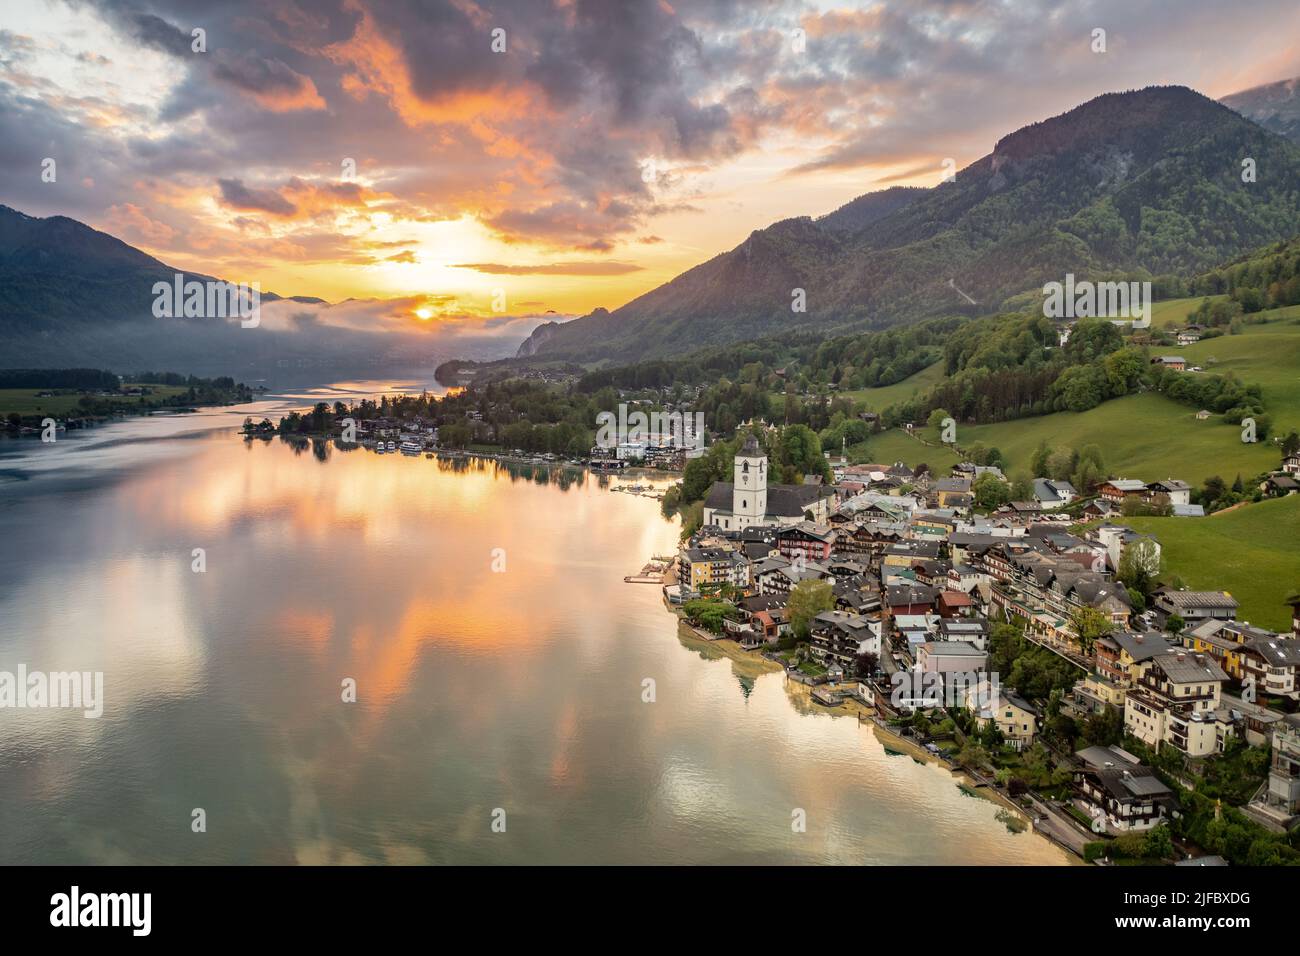 St. Wolfgang at the famous lake Wolfgangsee in Salzkammergut, Austria.. Scenic sunset at the Austrian Lake. Stock Photo